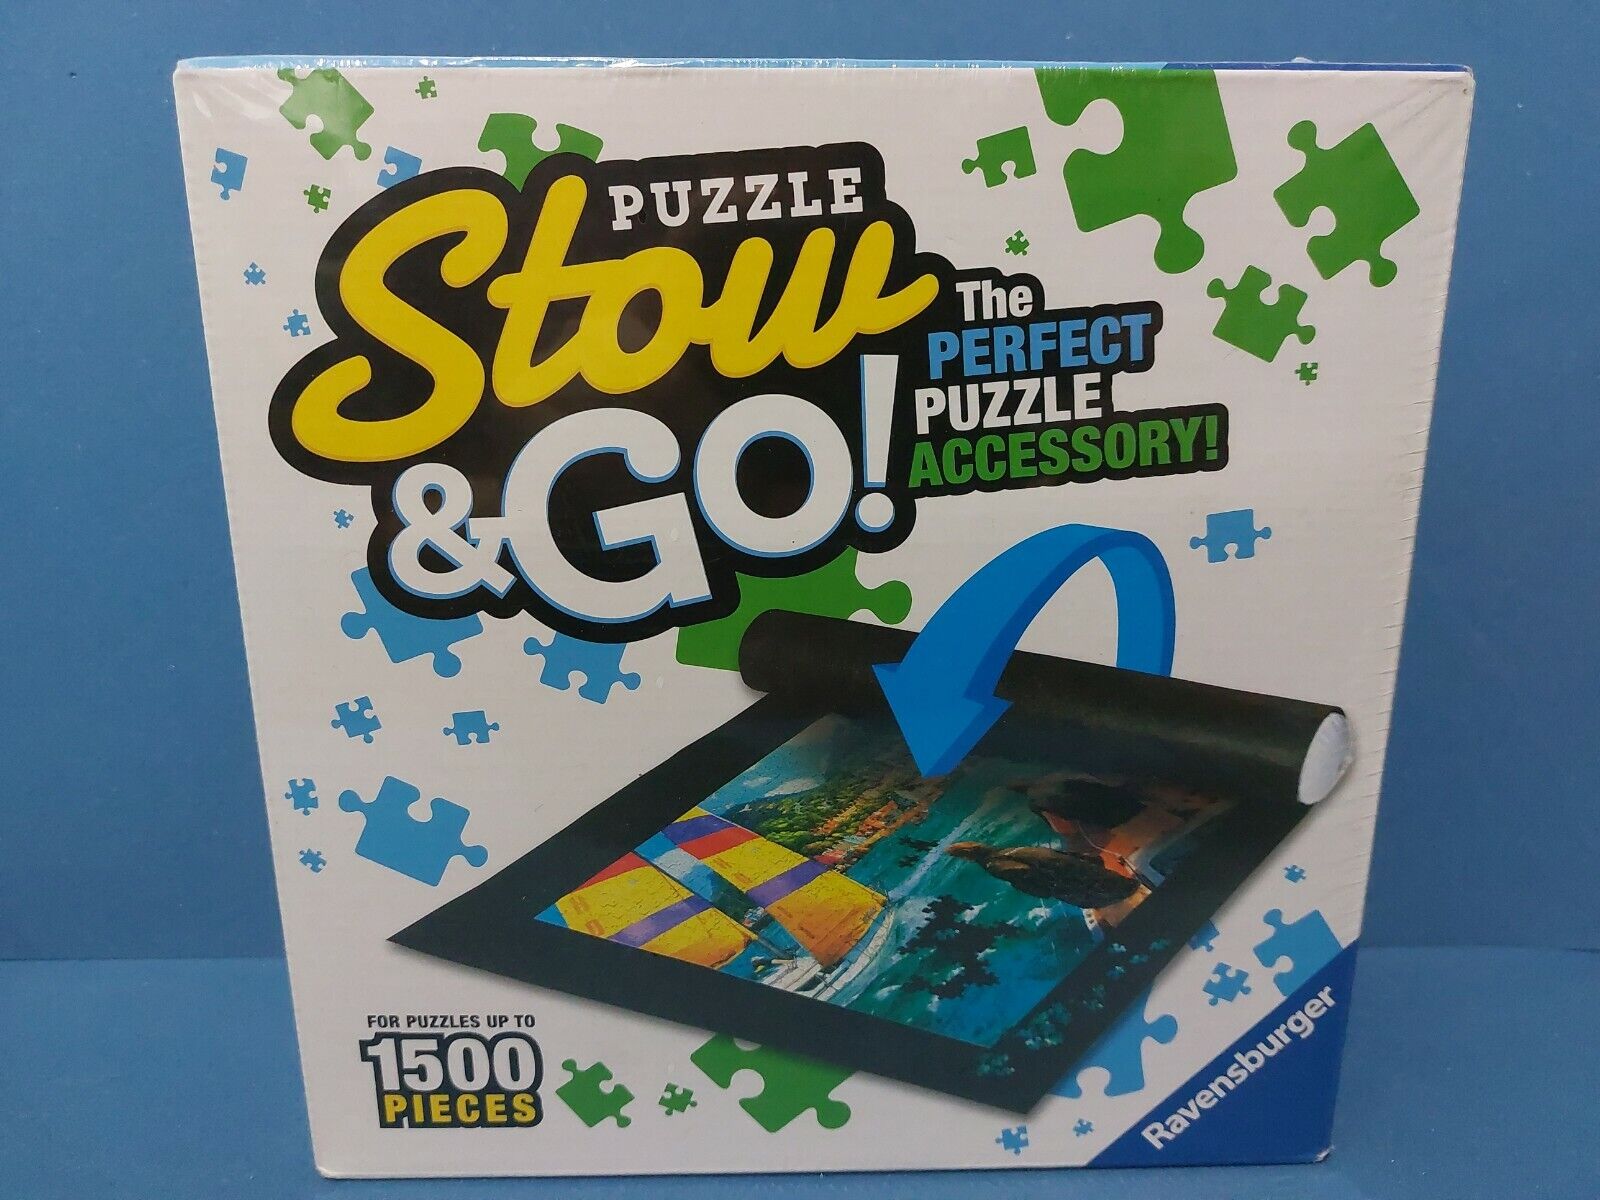 Brand New Sealed Ravensburger Puzzle Stow And Go (1500pc Puzzle)